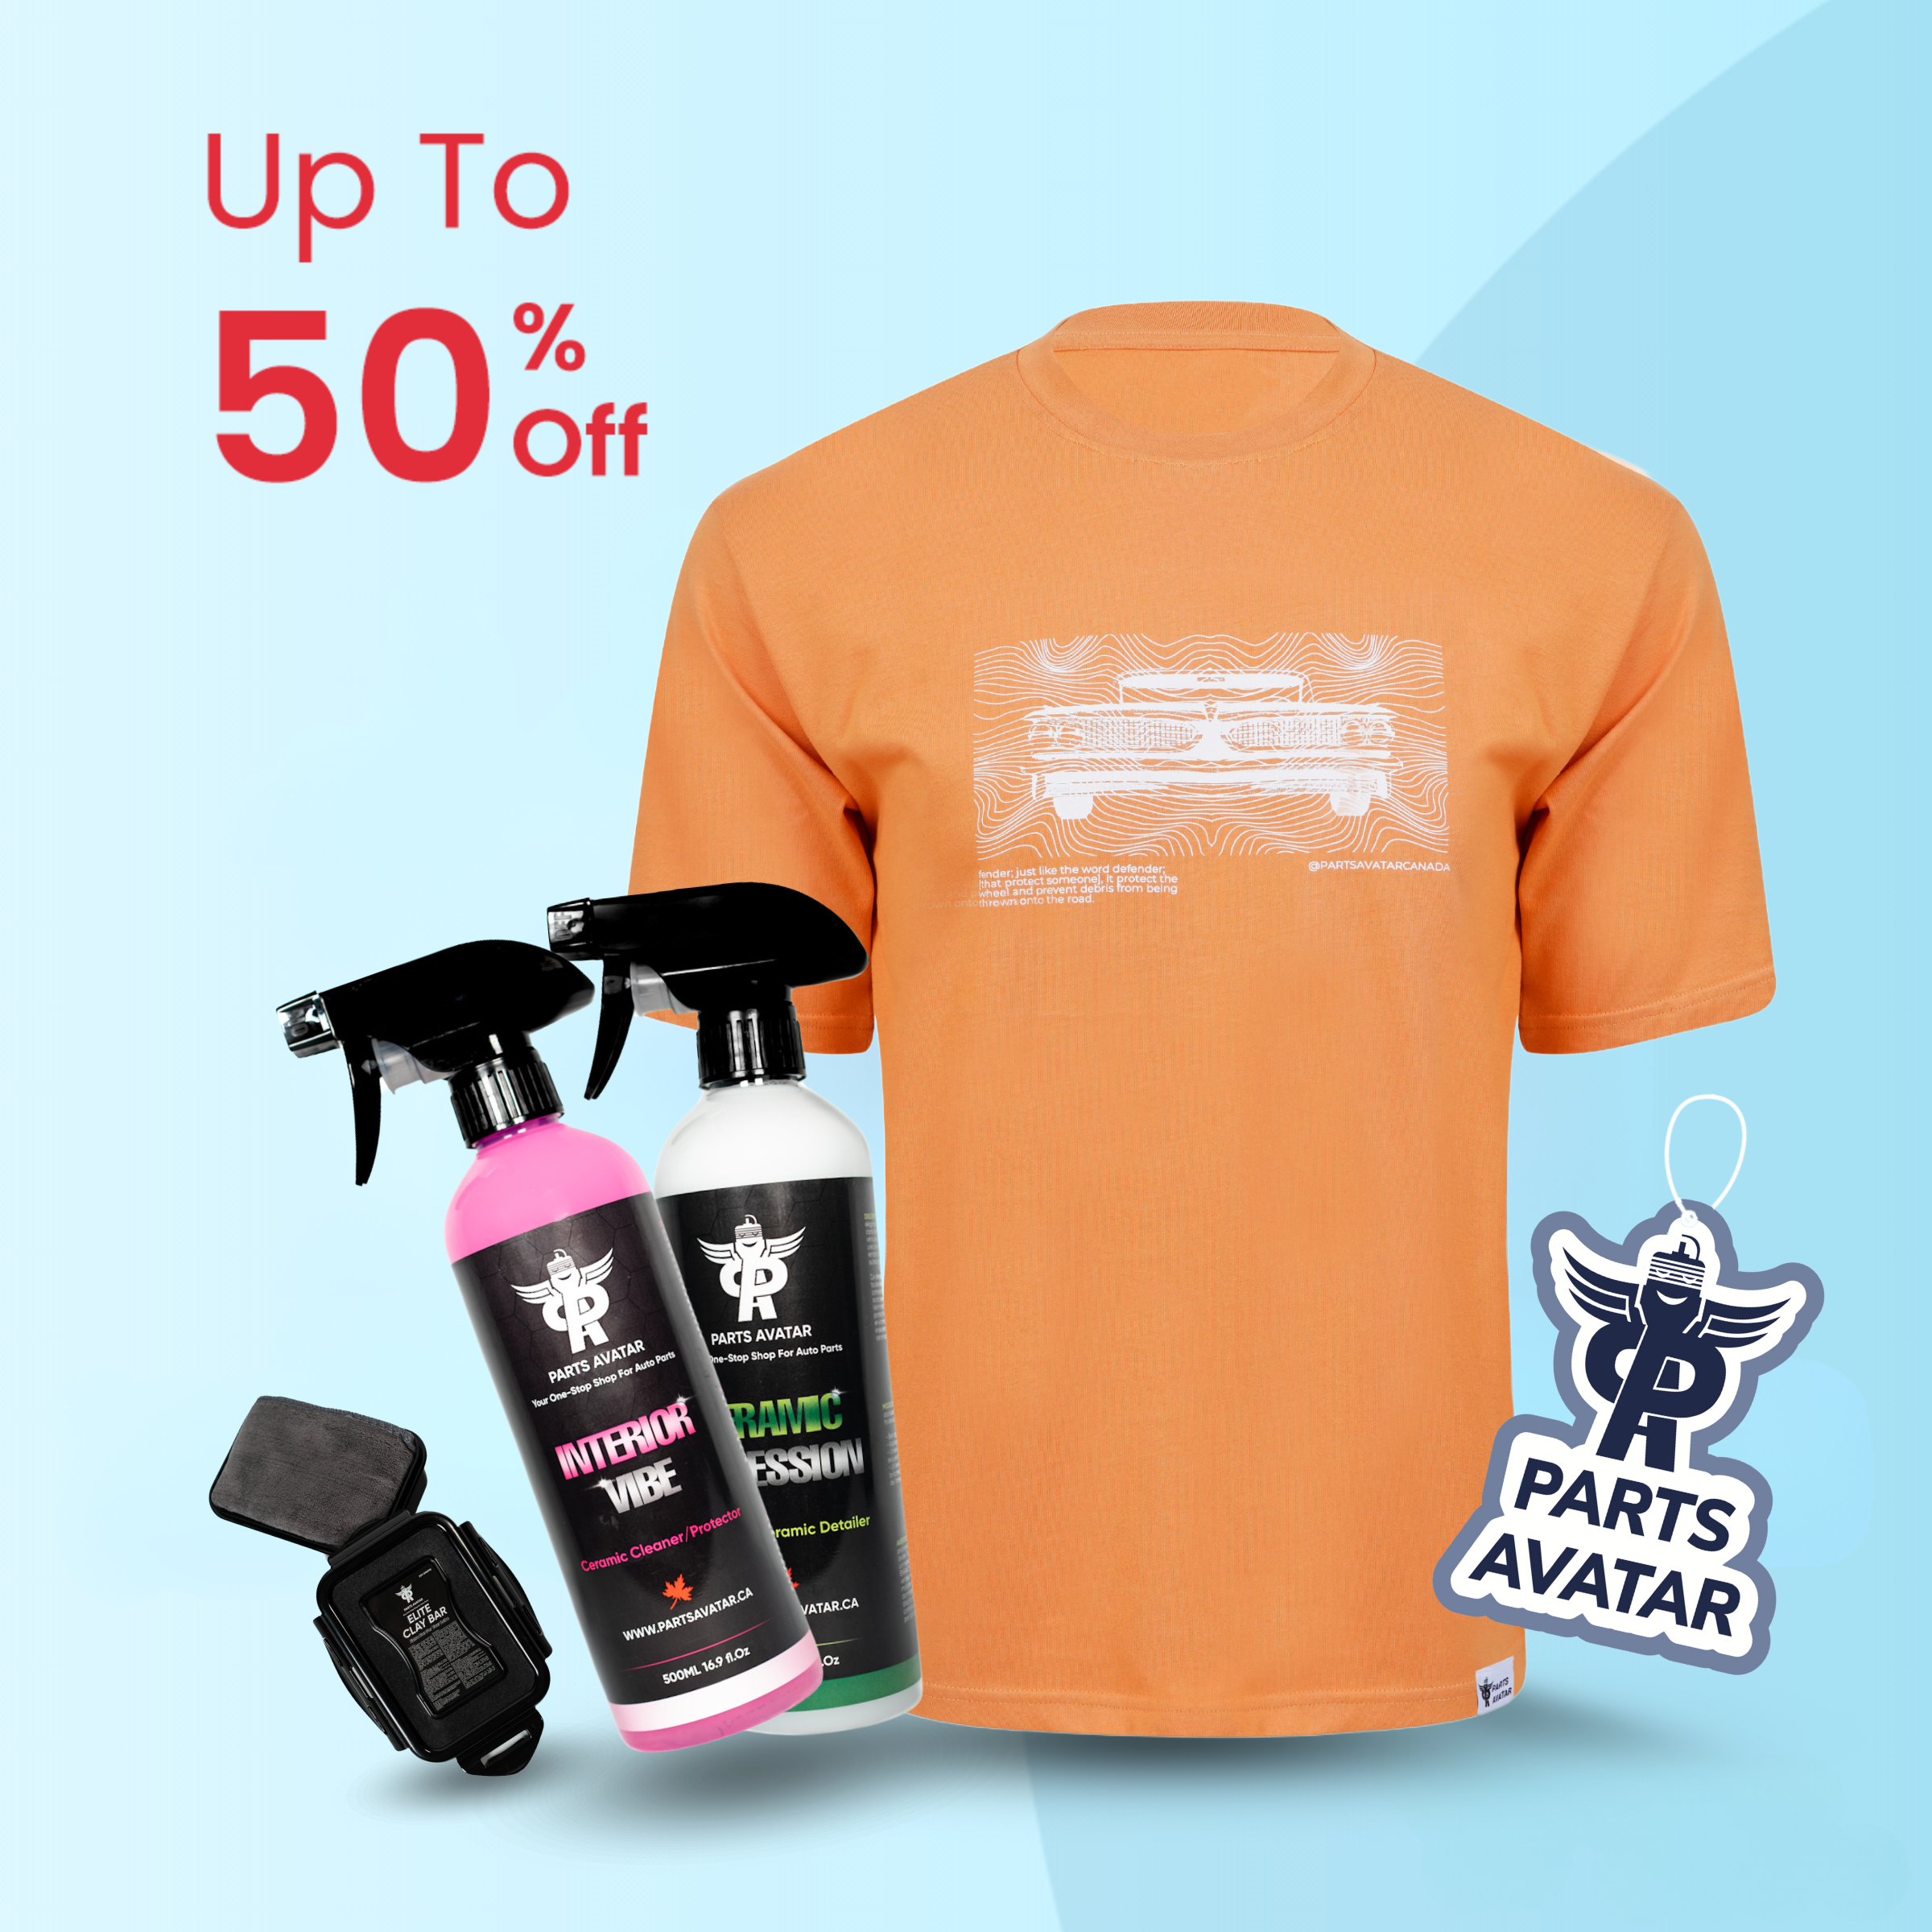 Explore Special Offers on Merchandise